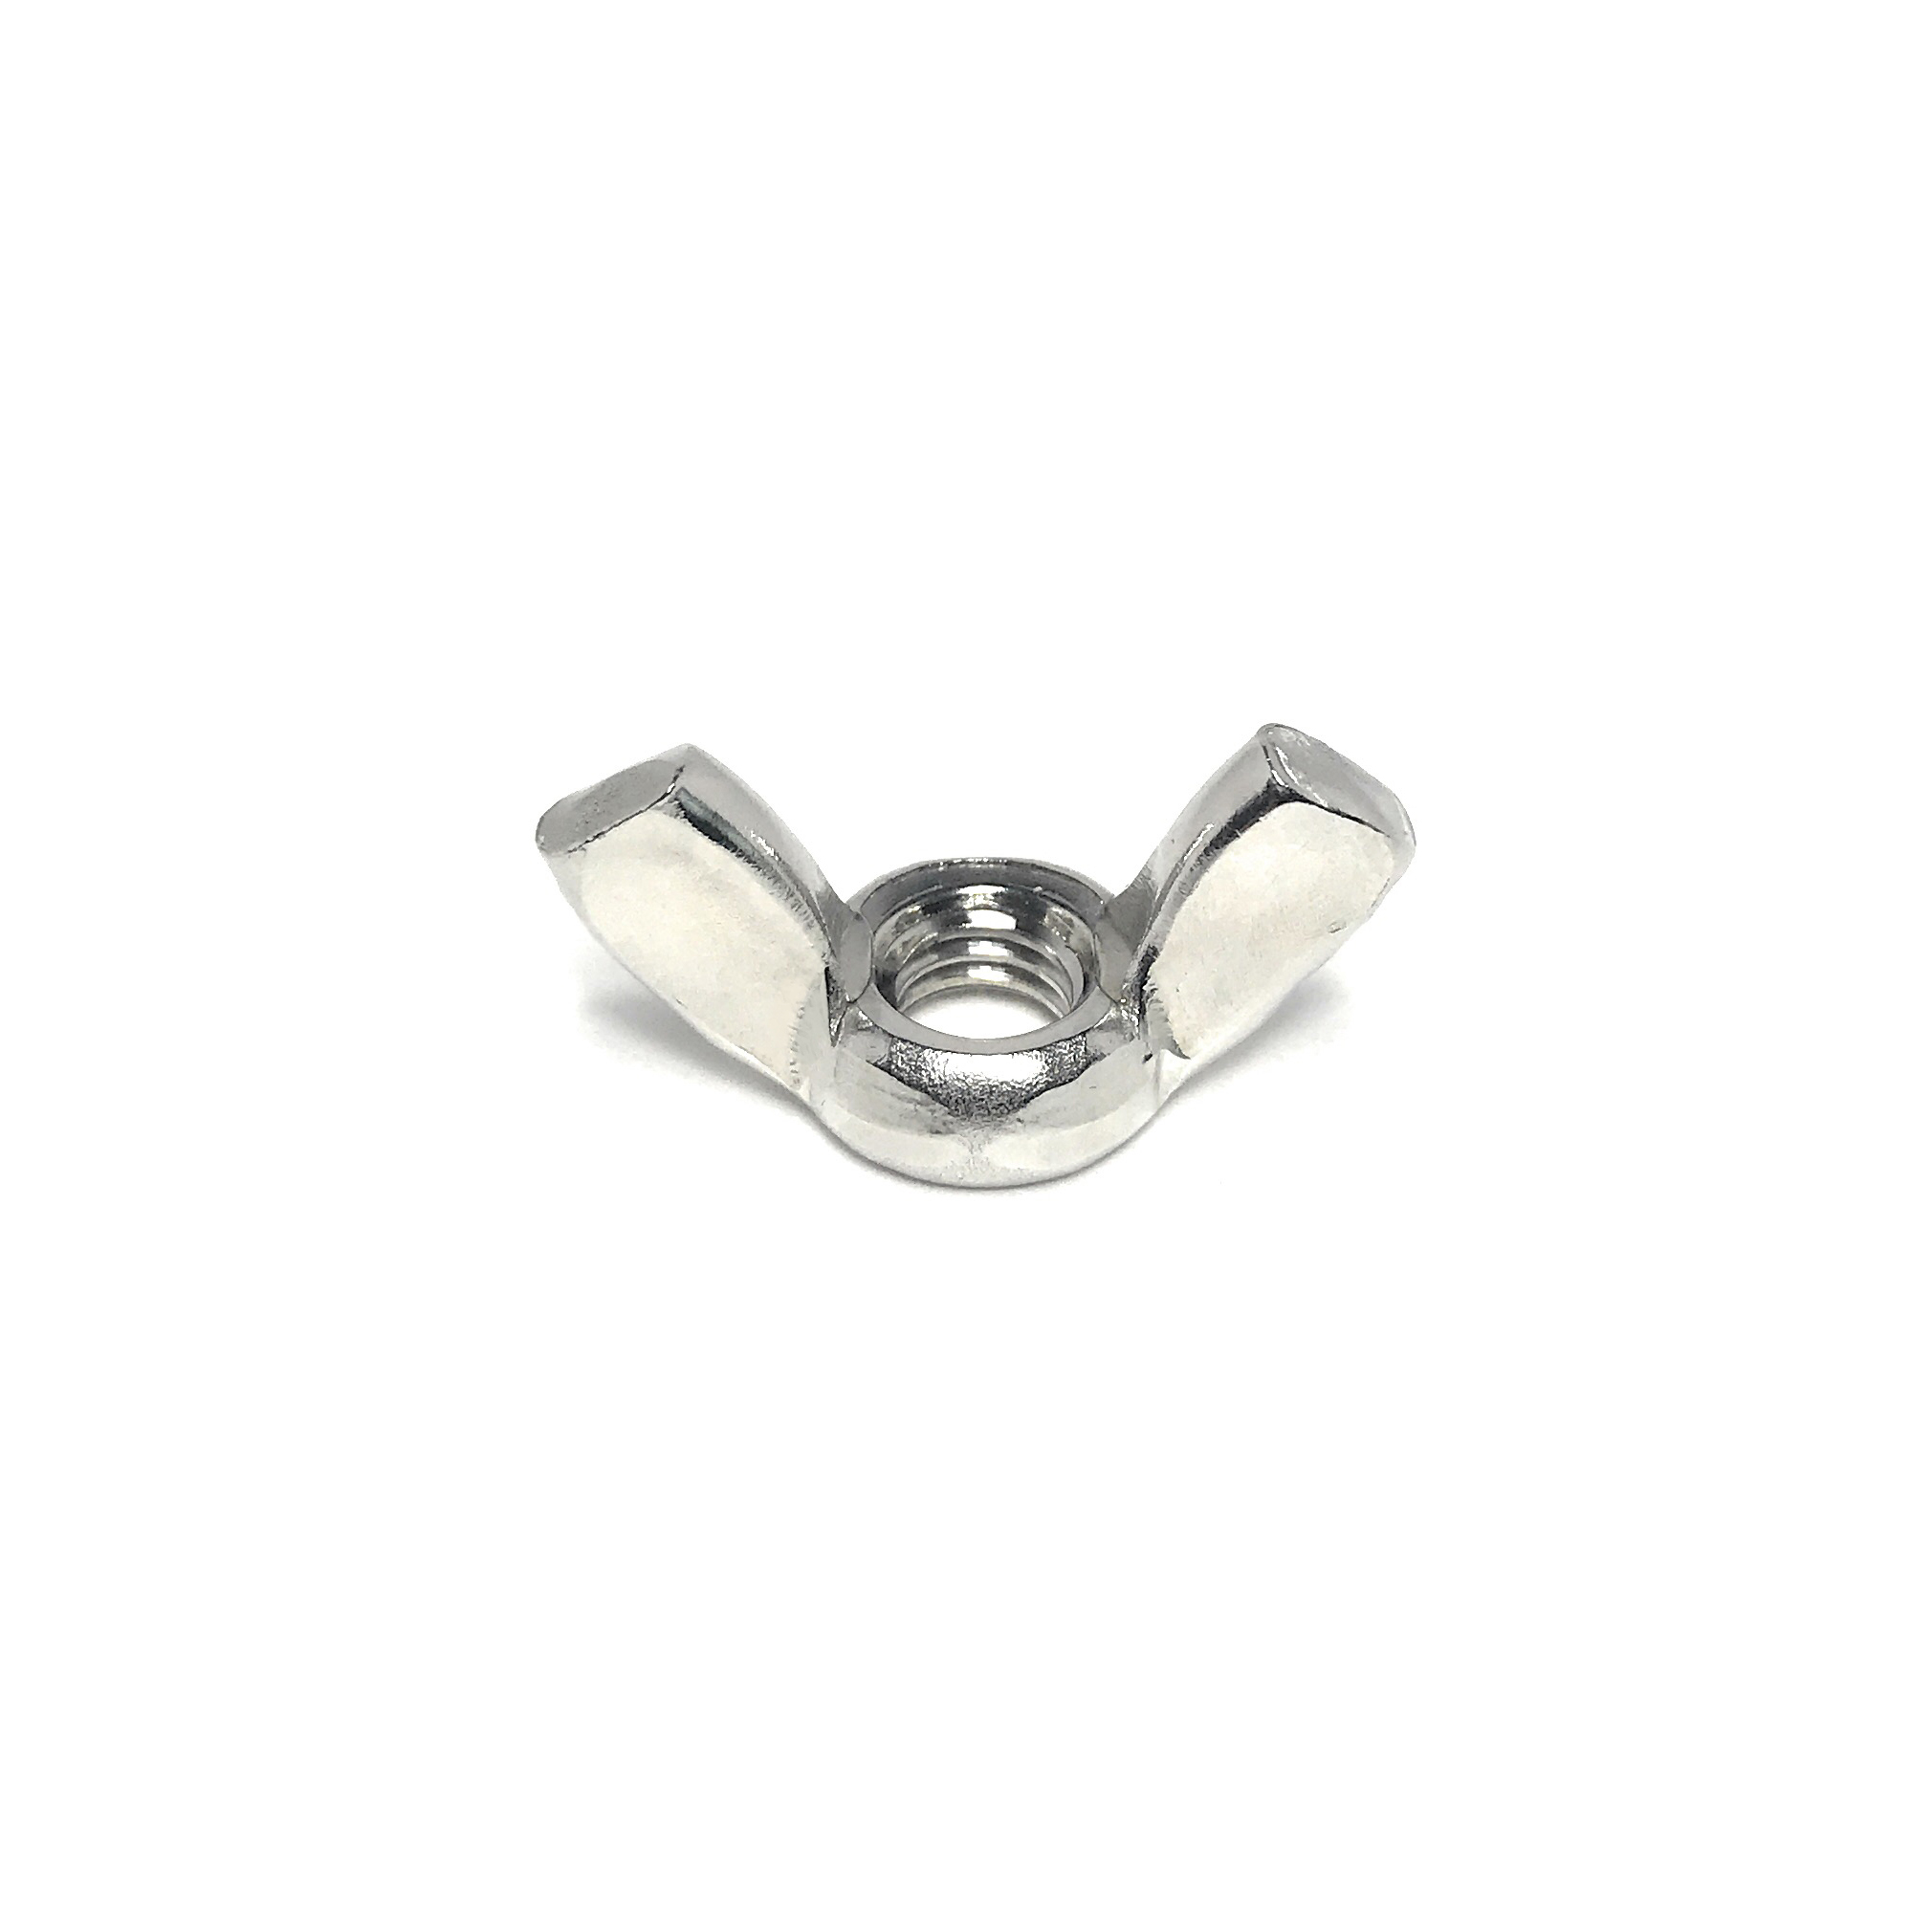 5 M10-1.50 Stainless Steel Wing Nuts DIN315 Metric American Form M10 Wing Nut 